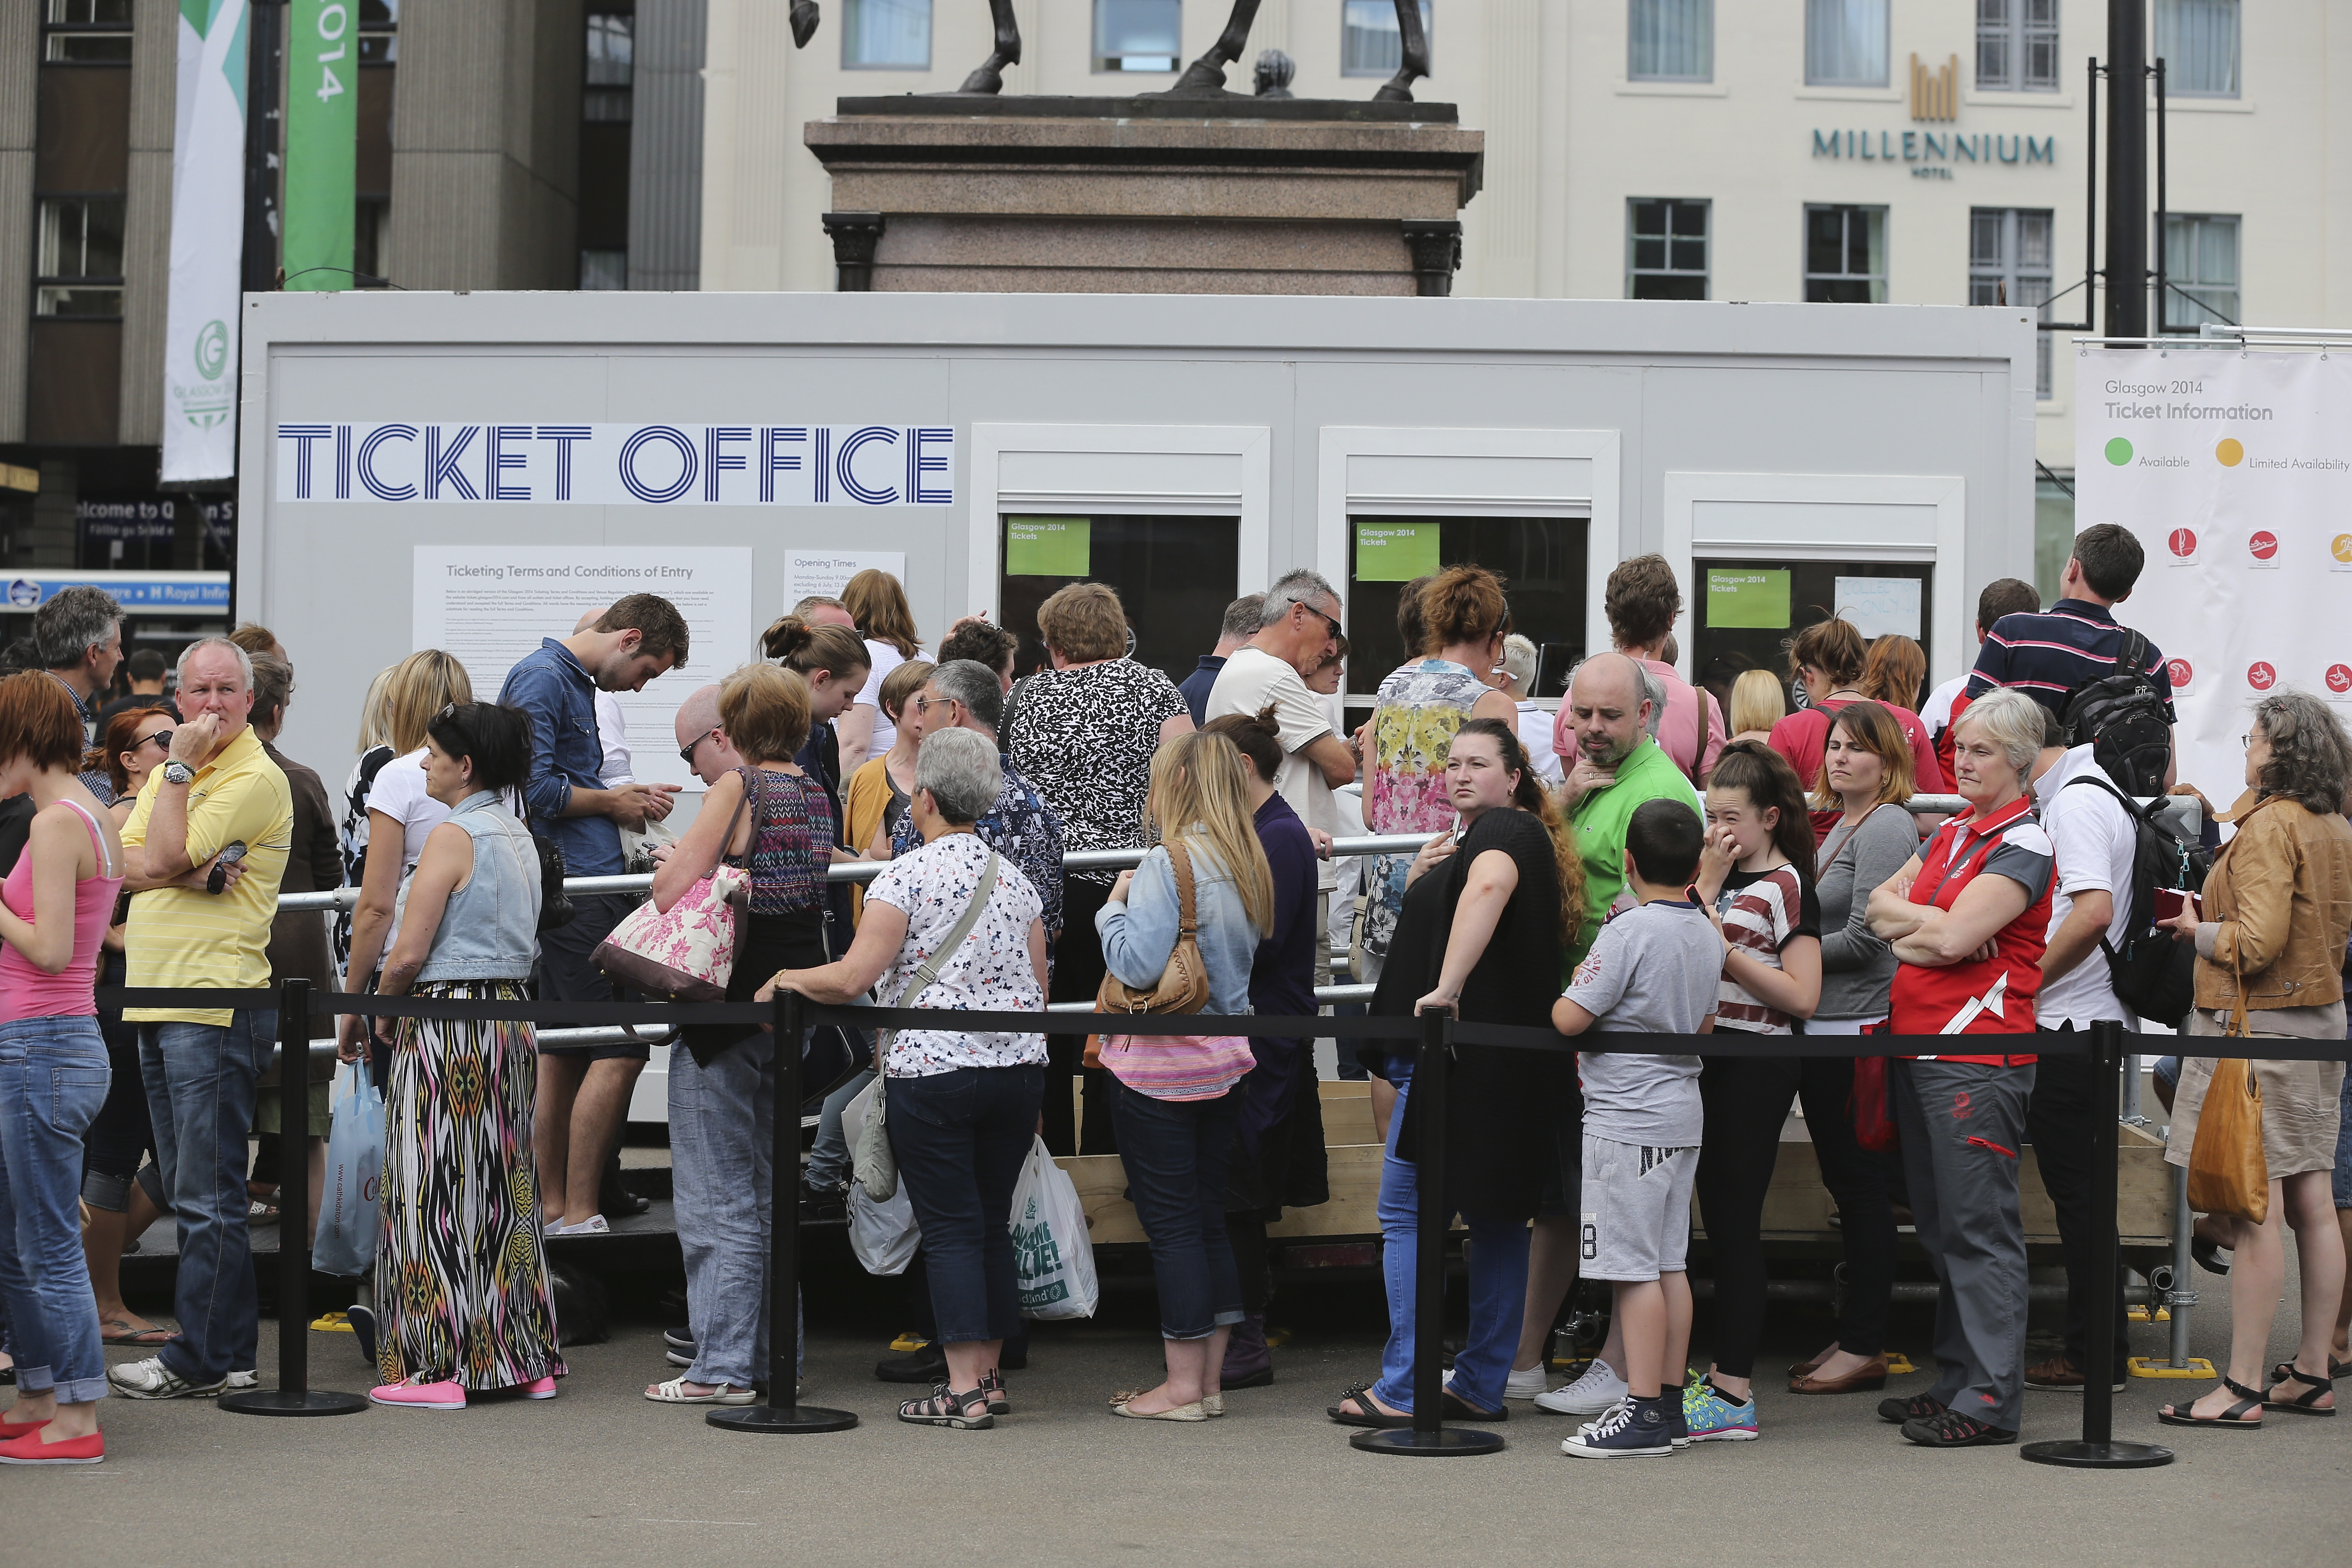 A queue of people outside a ticket office